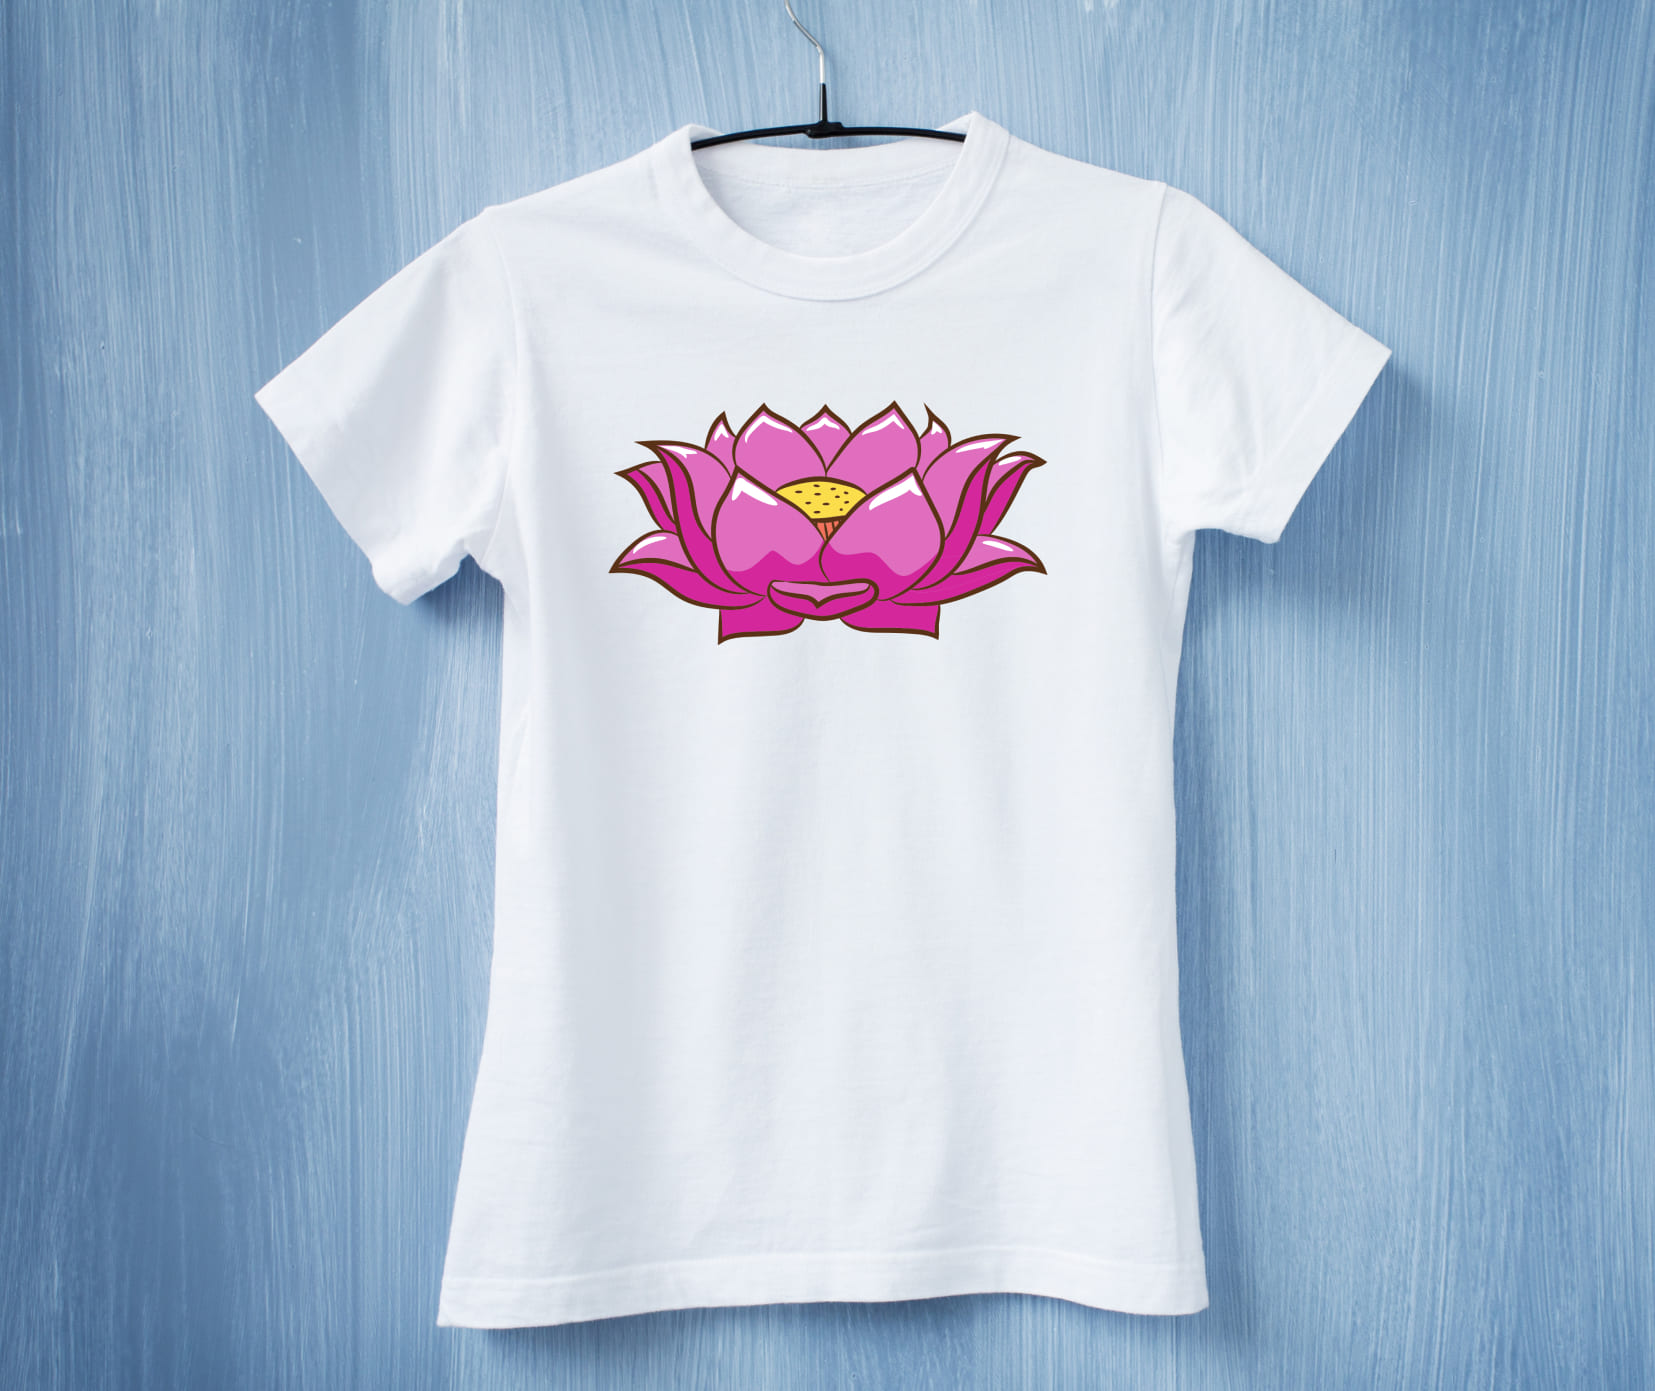 Big red lotus flower on the white t-shirt.